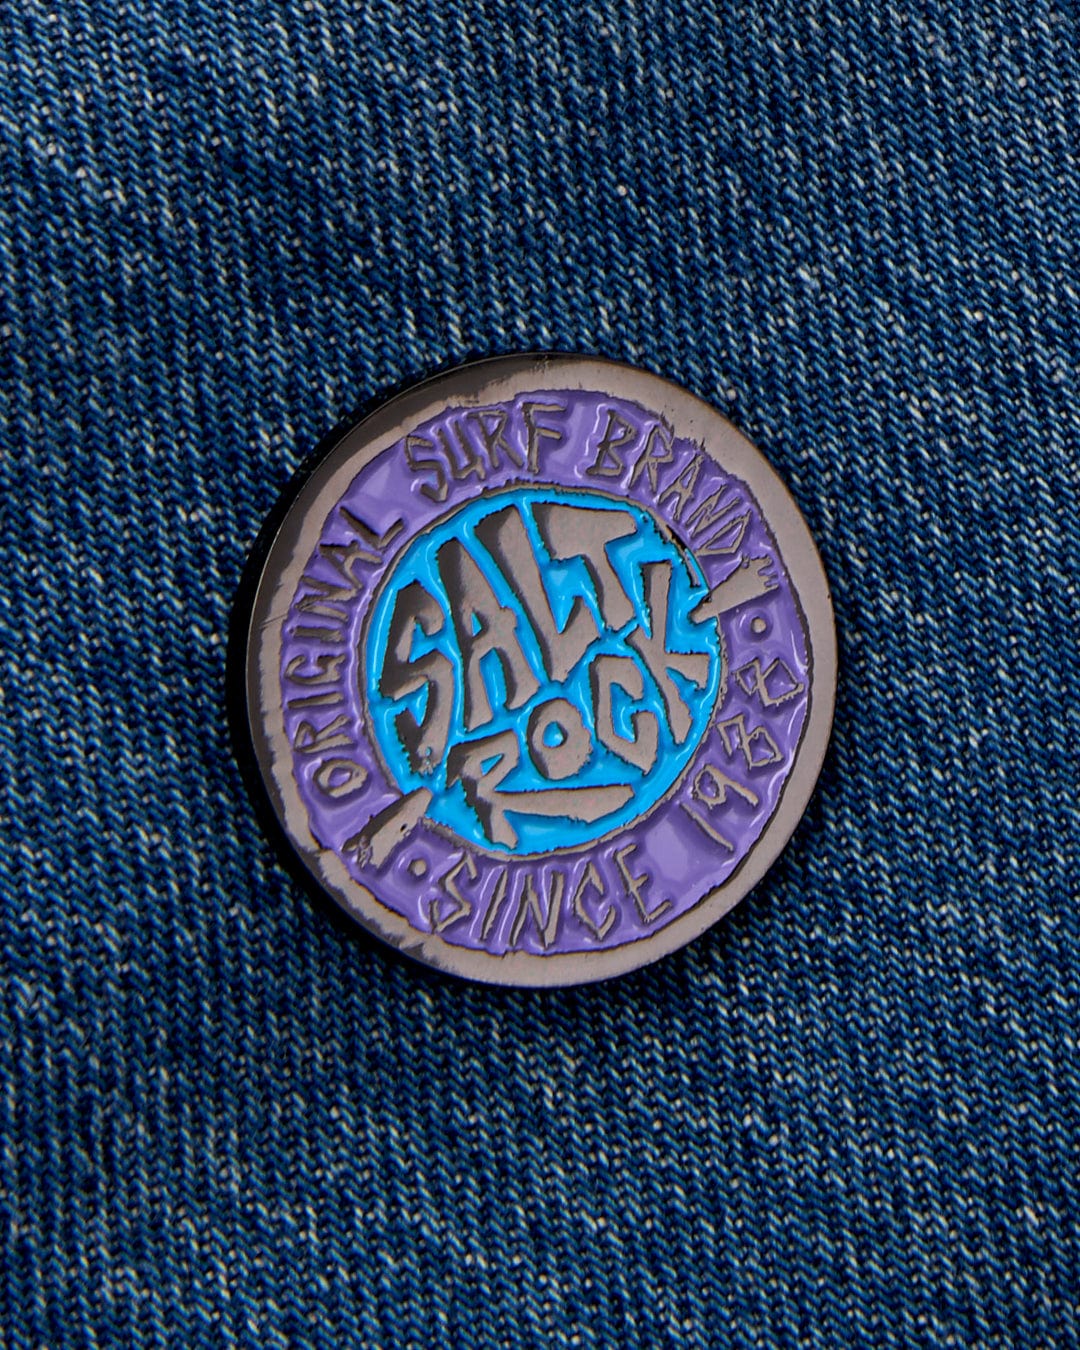 A SR Original pin badge featuring Saltrock graphics, pinned on a denim fabric with a safety clasp.